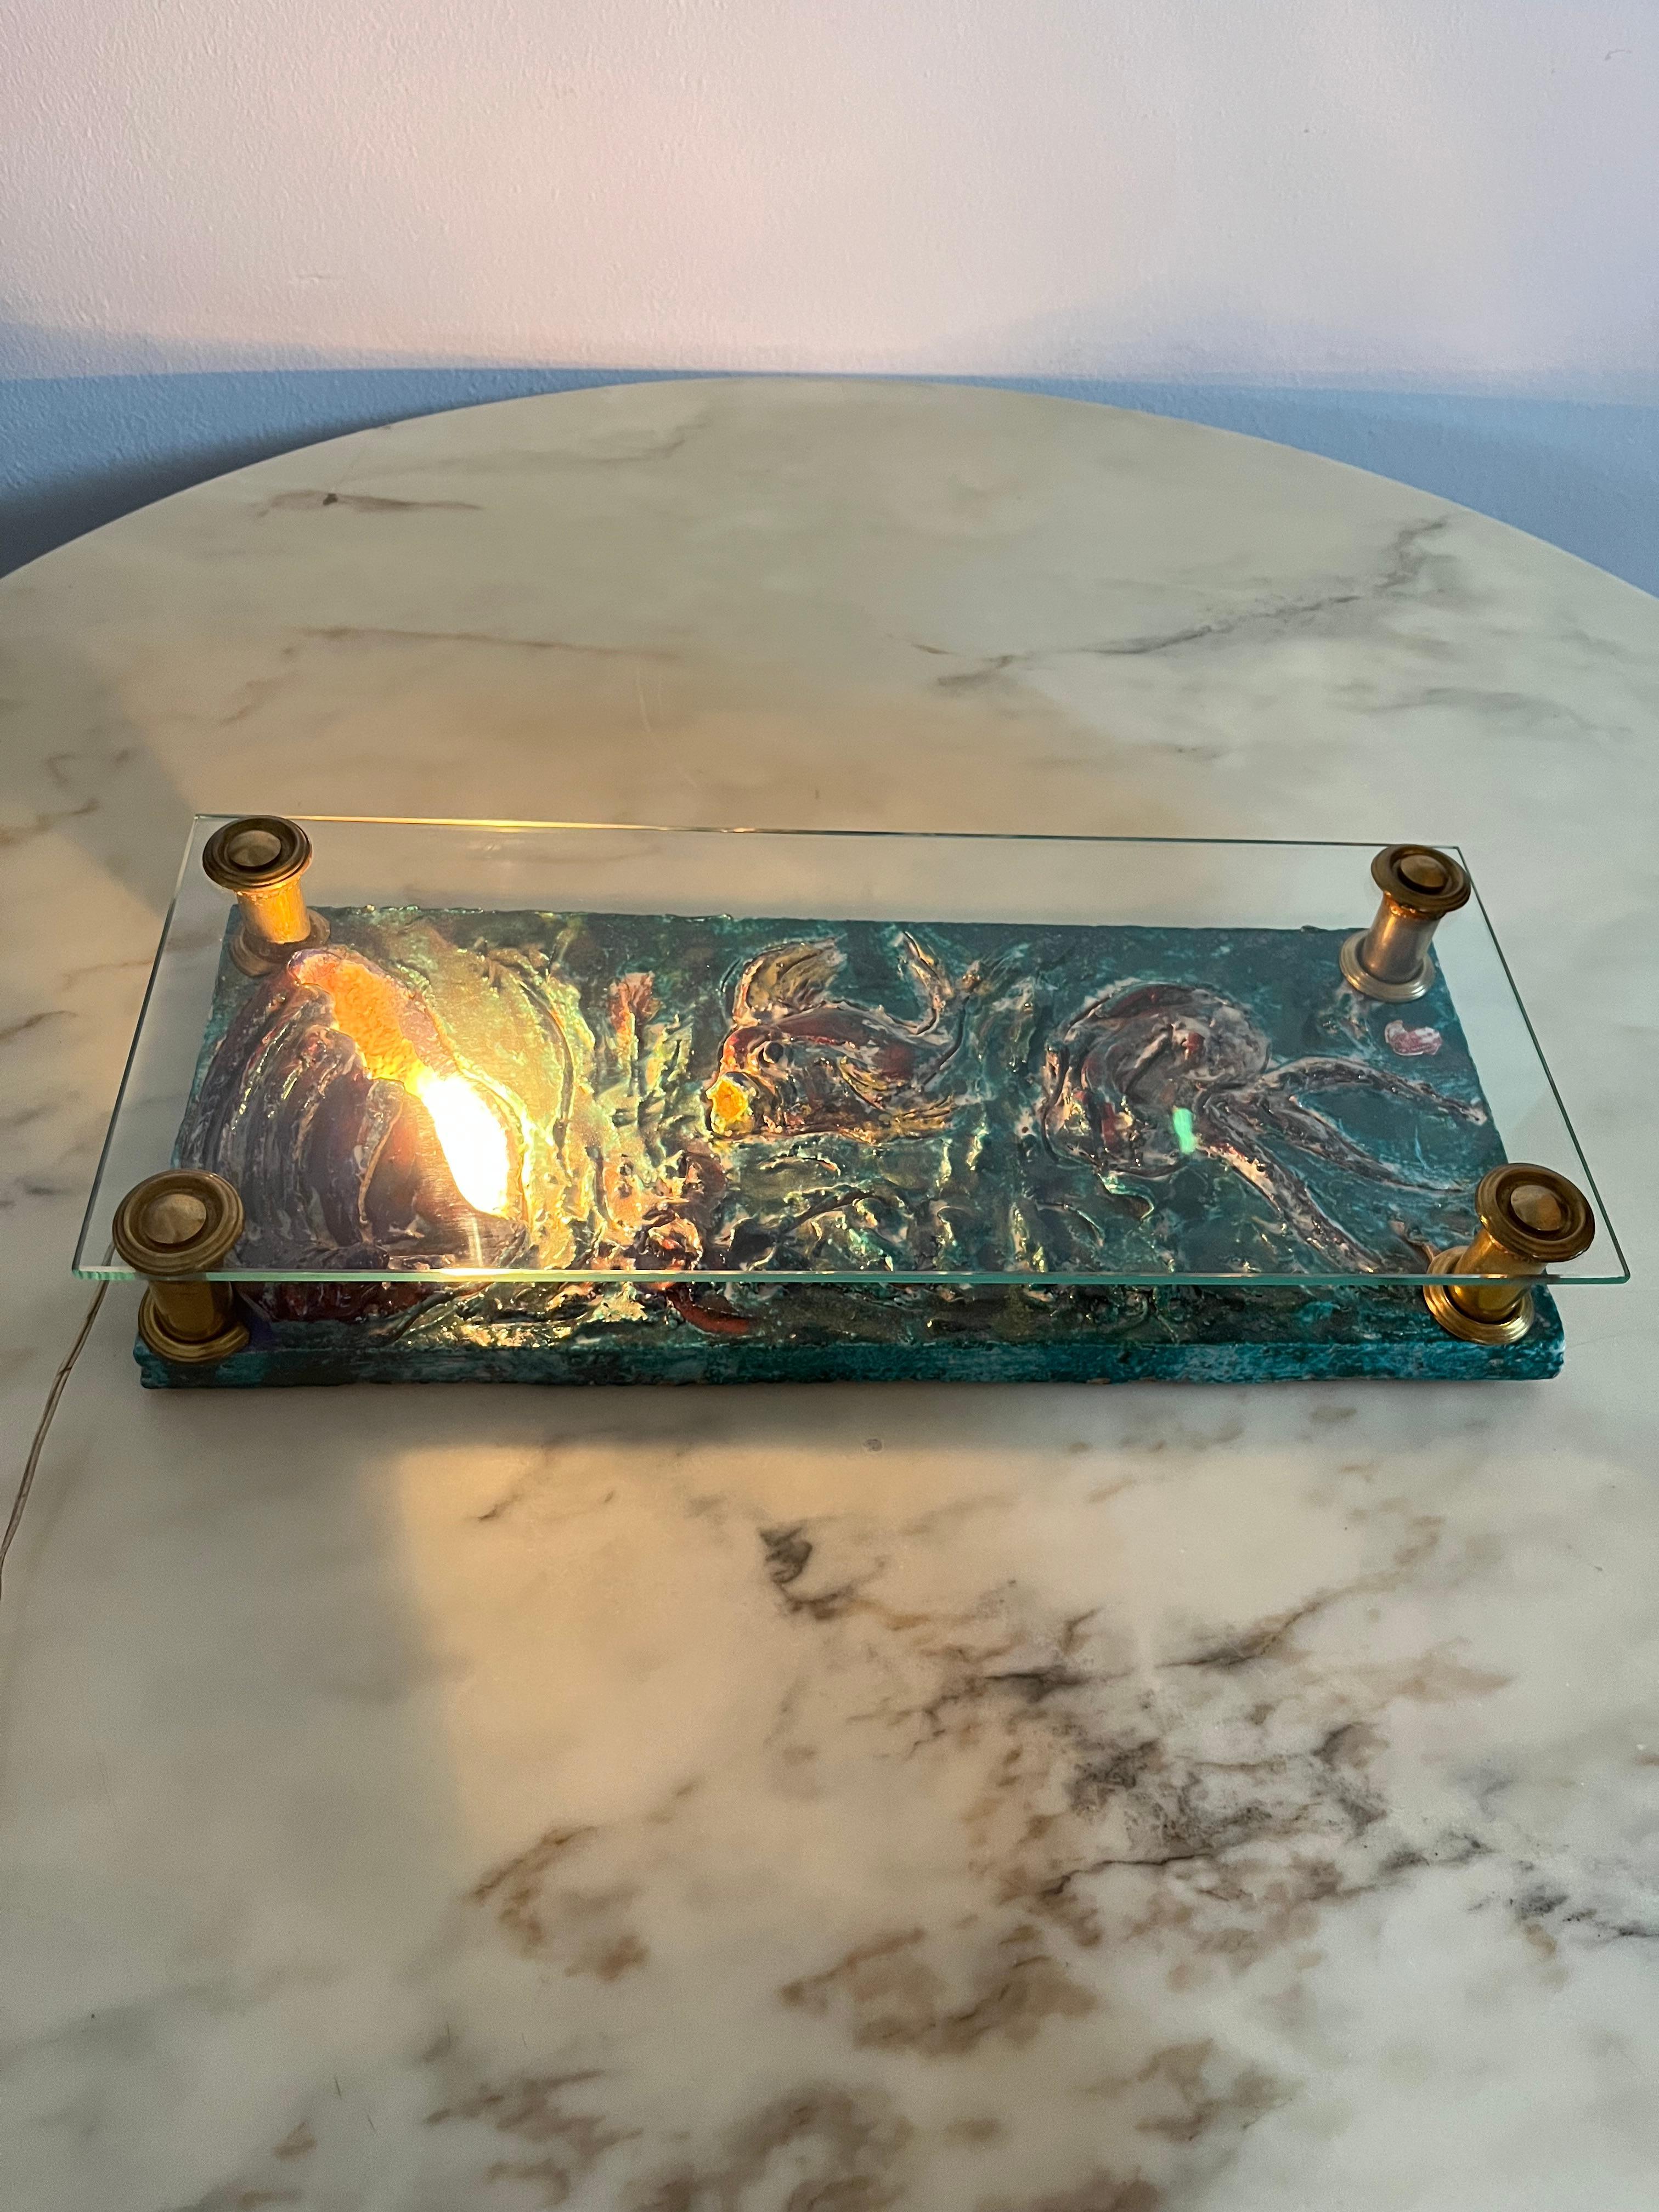 Italian glazed terracotta table lamp, 1950s
Depicted a seascape with fish and shells.
Glass top and brass supports. Single piece.
Small signs of time and use, as evidenced by the photographs of the description.